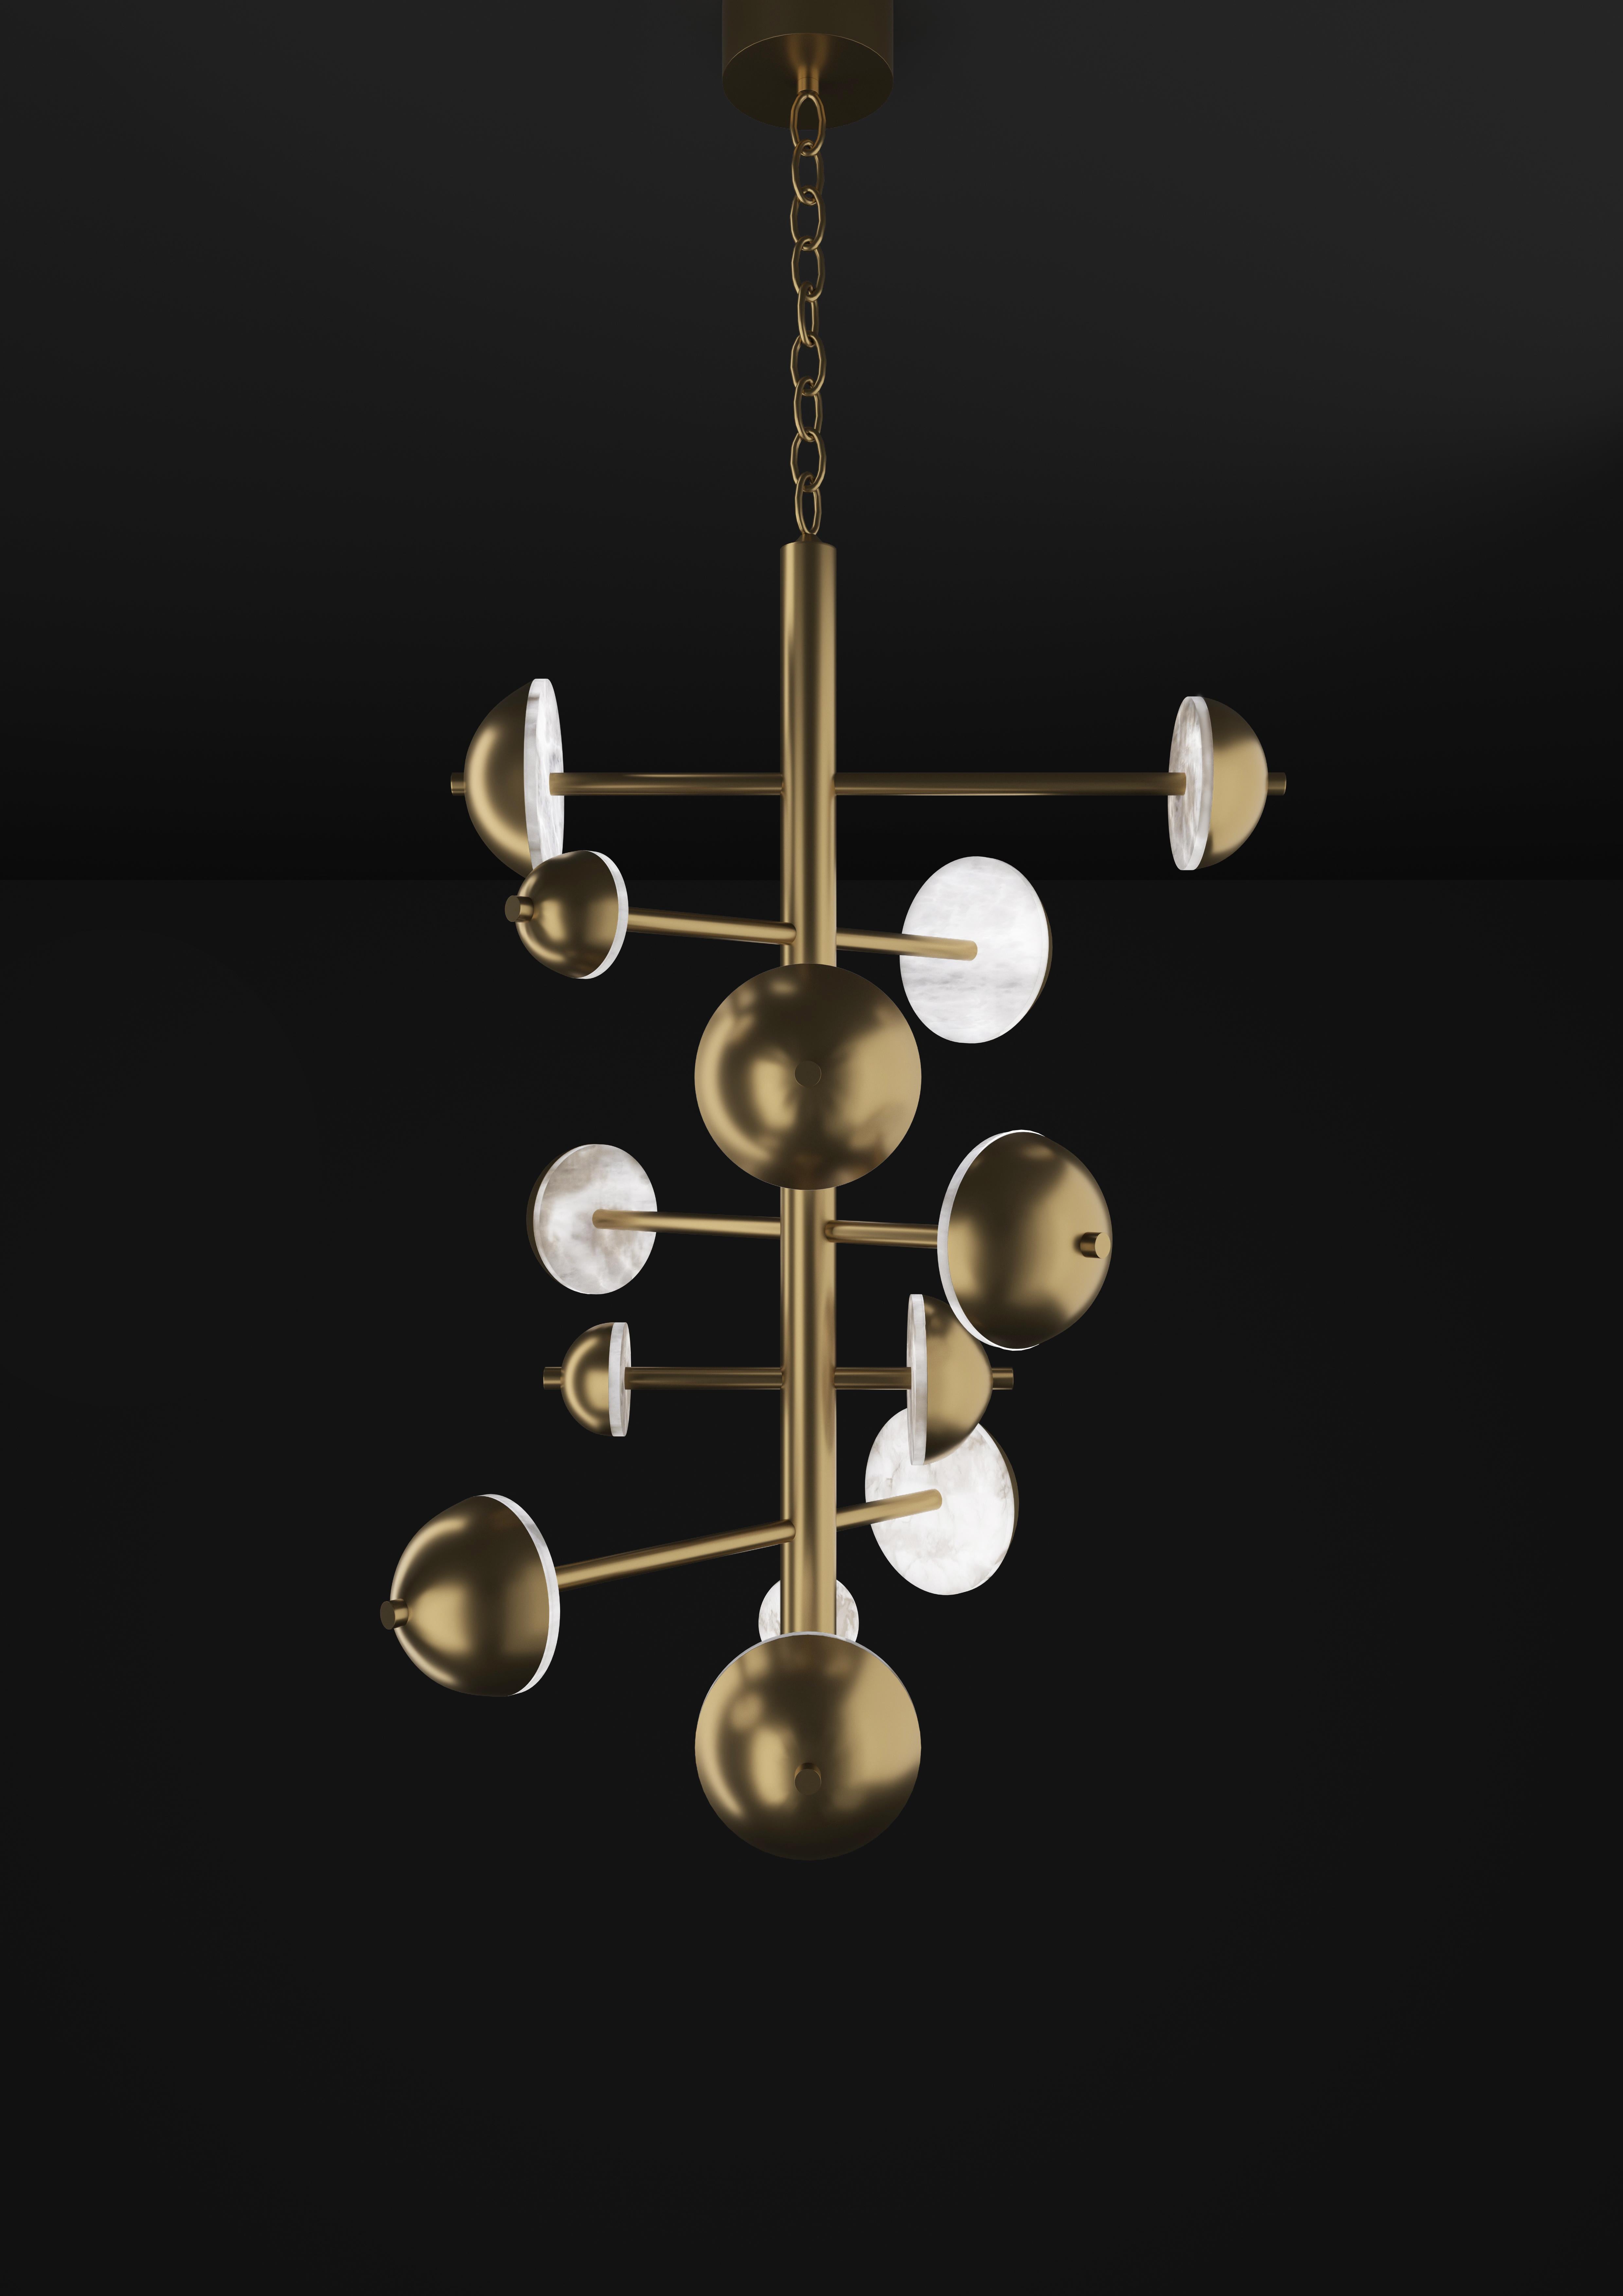 Ares Bronze Chandelier by Alabastro Italiano
Dimensions: D 74,5 x W 73 x H 110 cm.
Materials: White alabaster and bronze.

Available in different finishes: Shiny Silver, Bronze, Brushed Brass, Ruggine of Florence, Brushed Burnished, Shiny Gold,